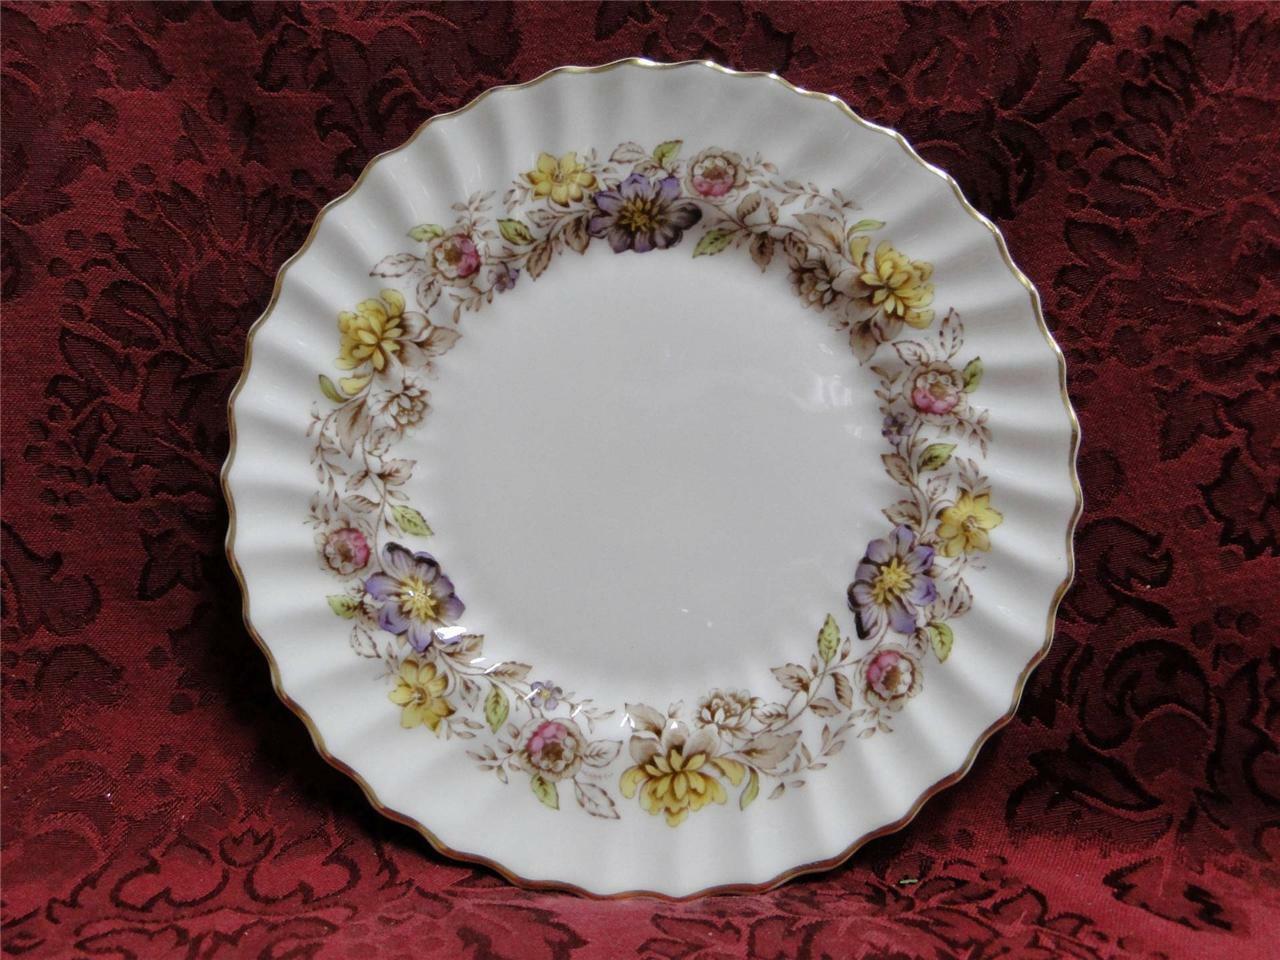 Royal Doulton Mayfair H4897, Multicolored Floral Band: Salad Plate (s), 8 1/4"